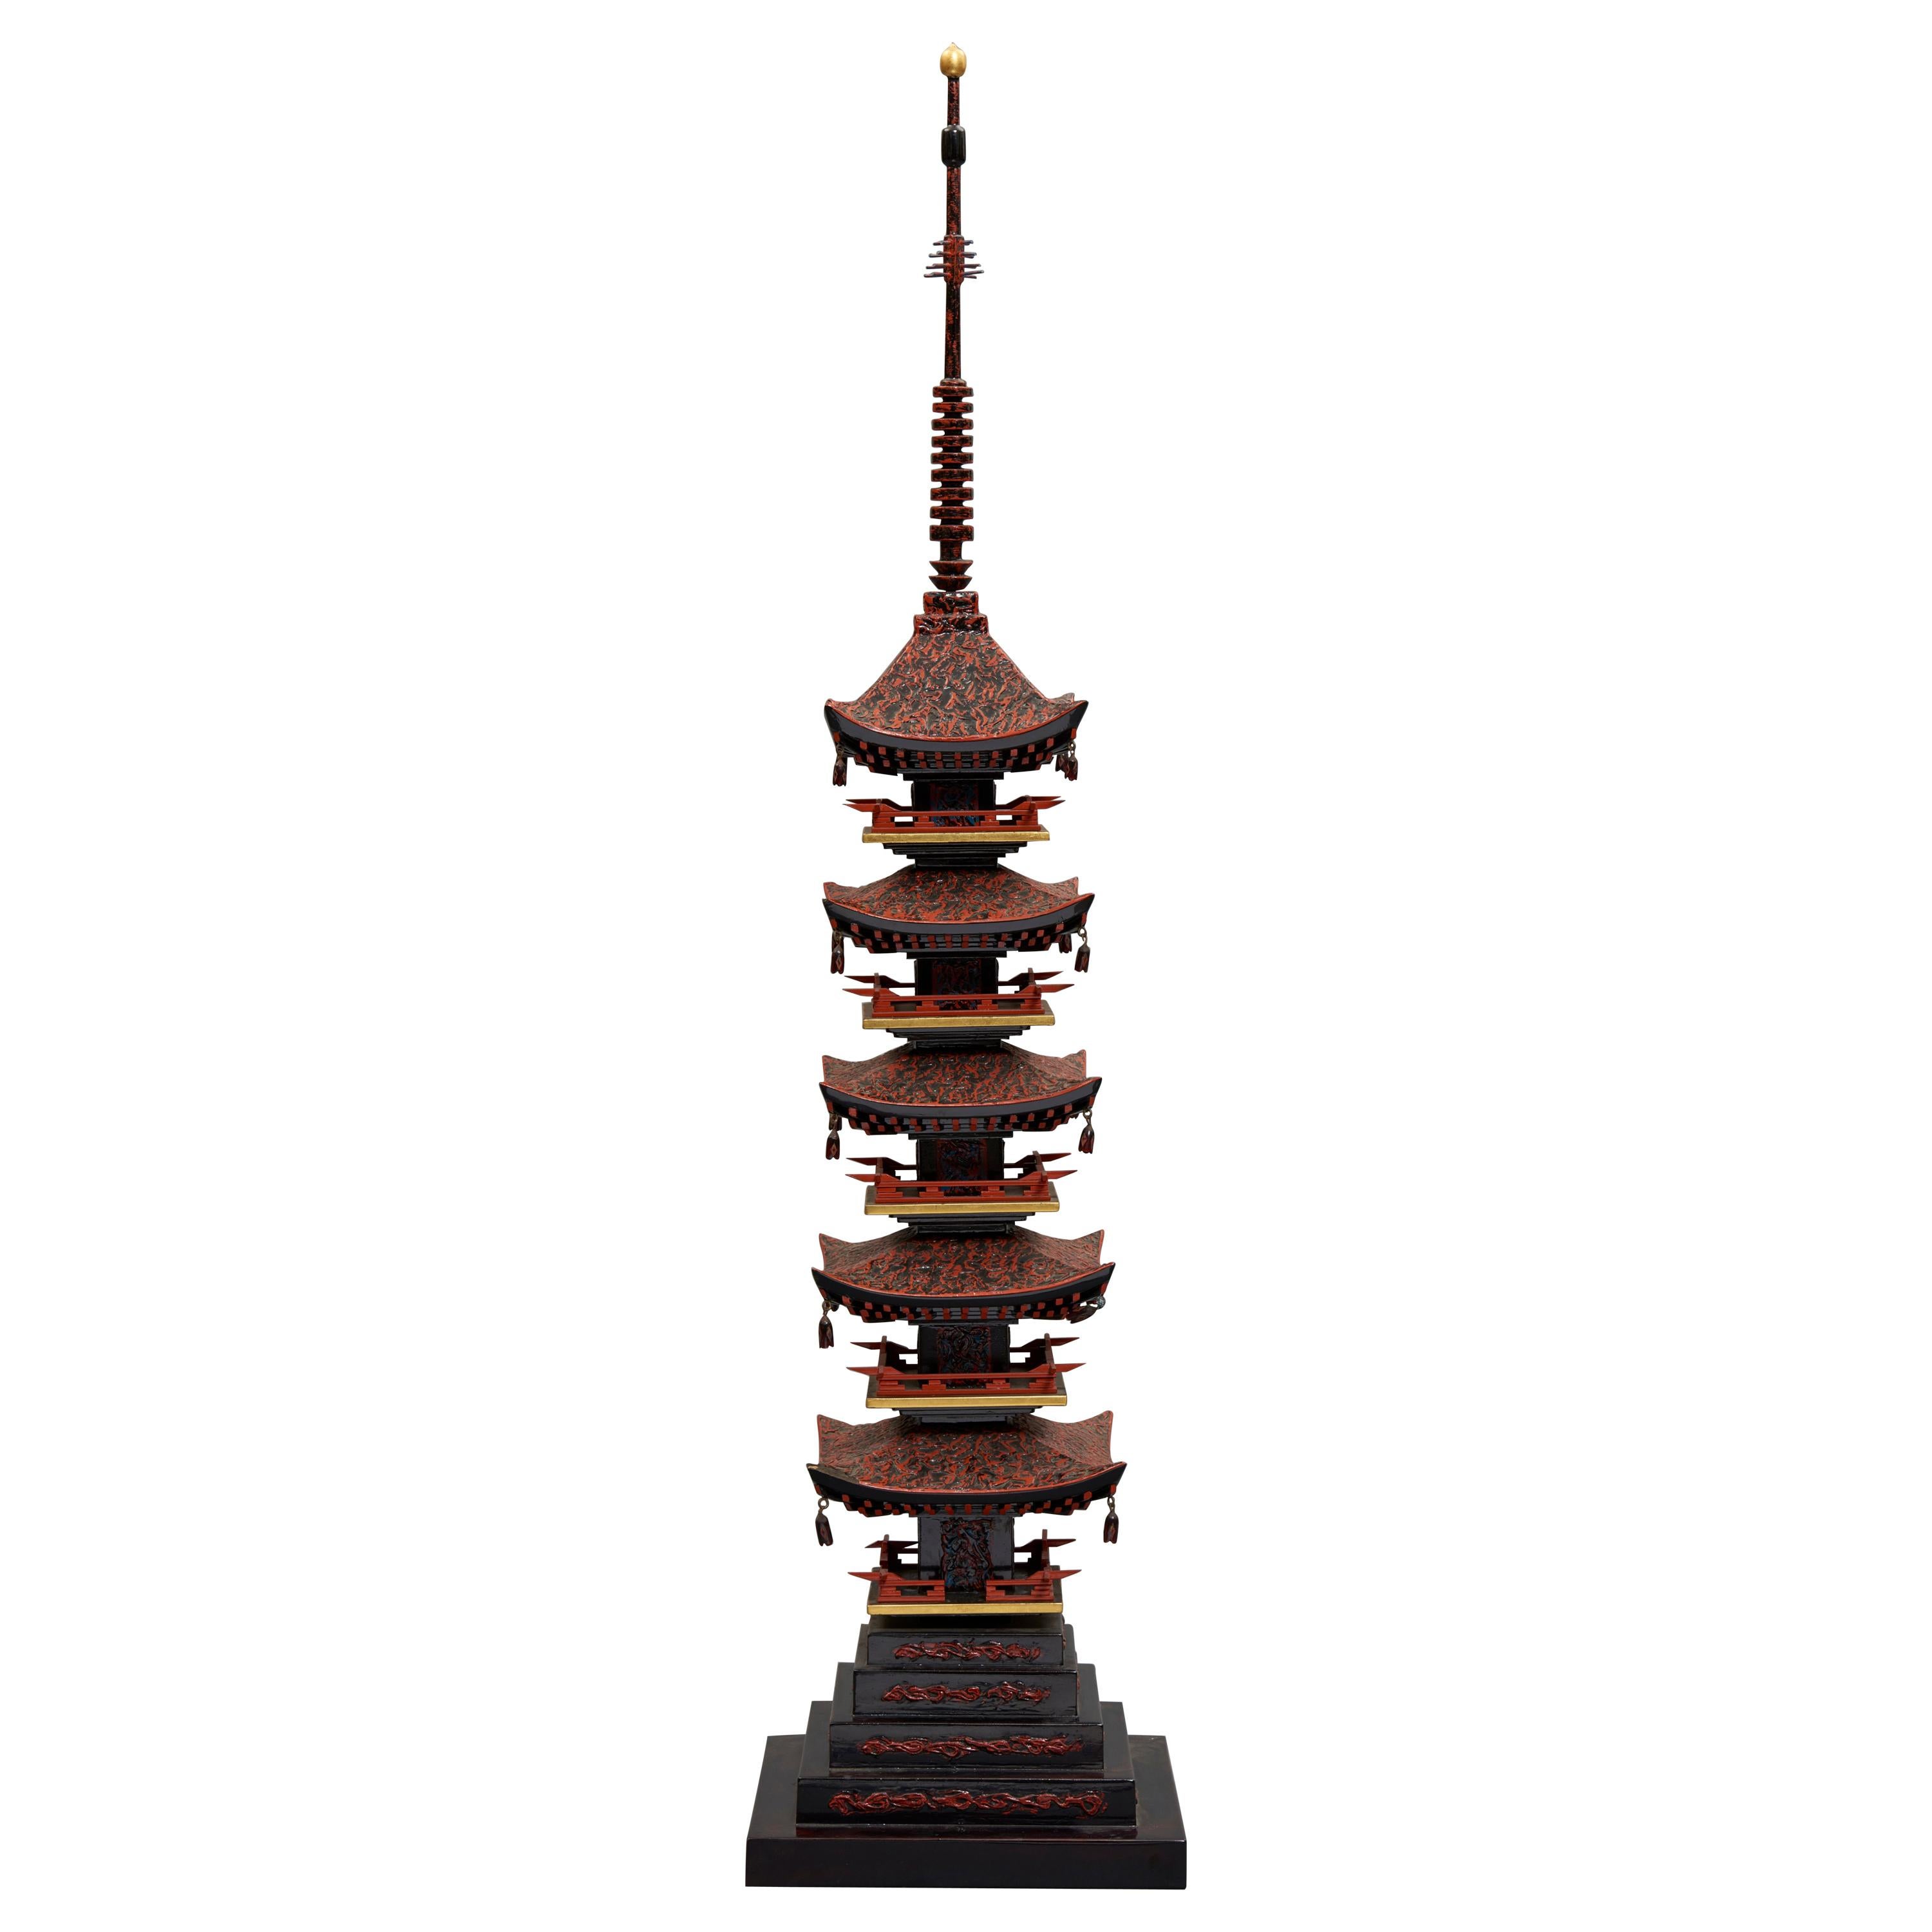 Fabulous Lacquer Pagoda Chinoiserie Sculpture with Original Wooden Box